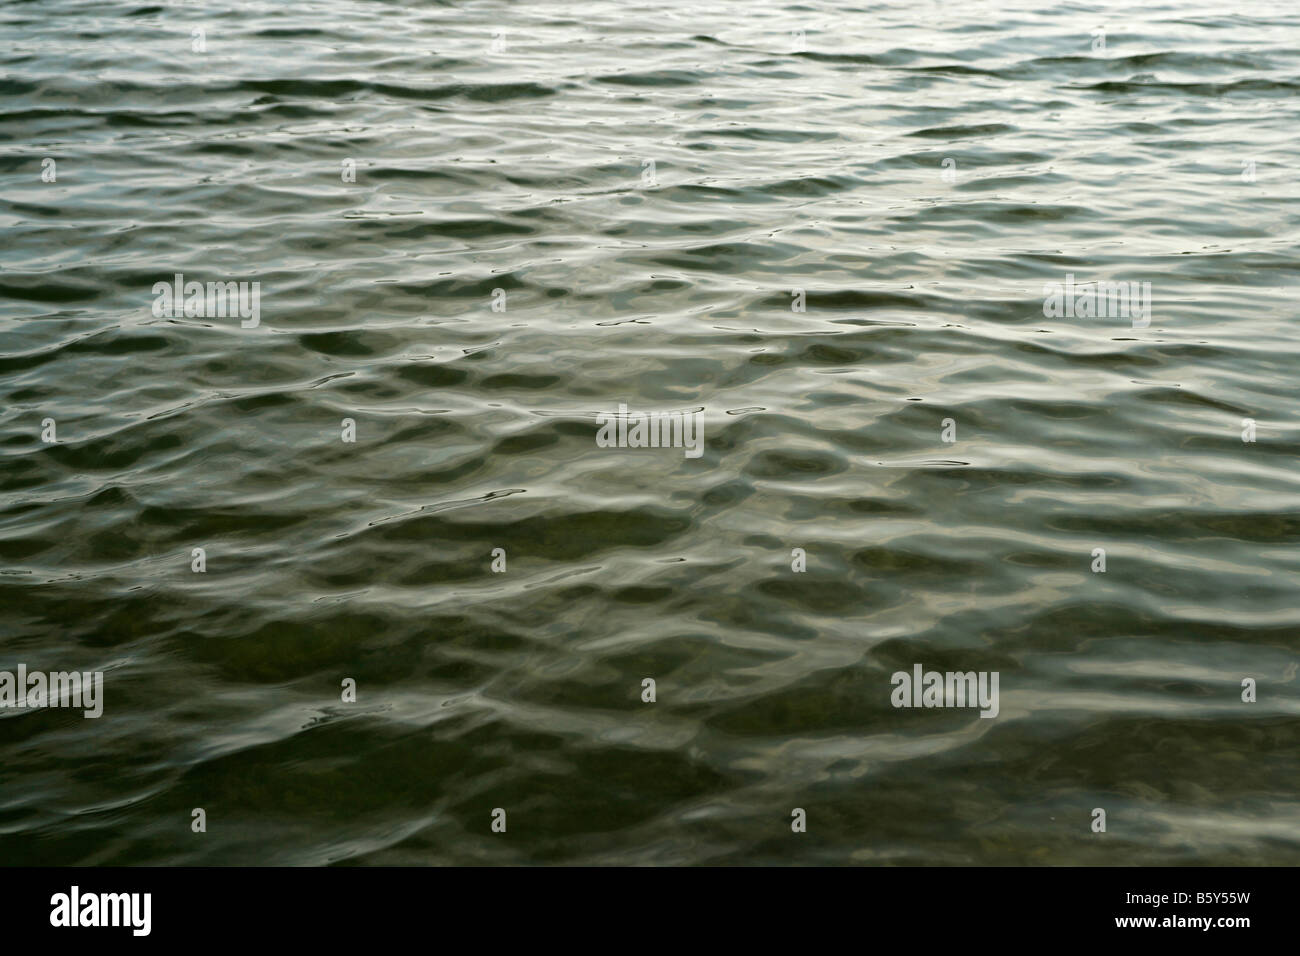 Waves in a lake of deep cool water Stock Photo